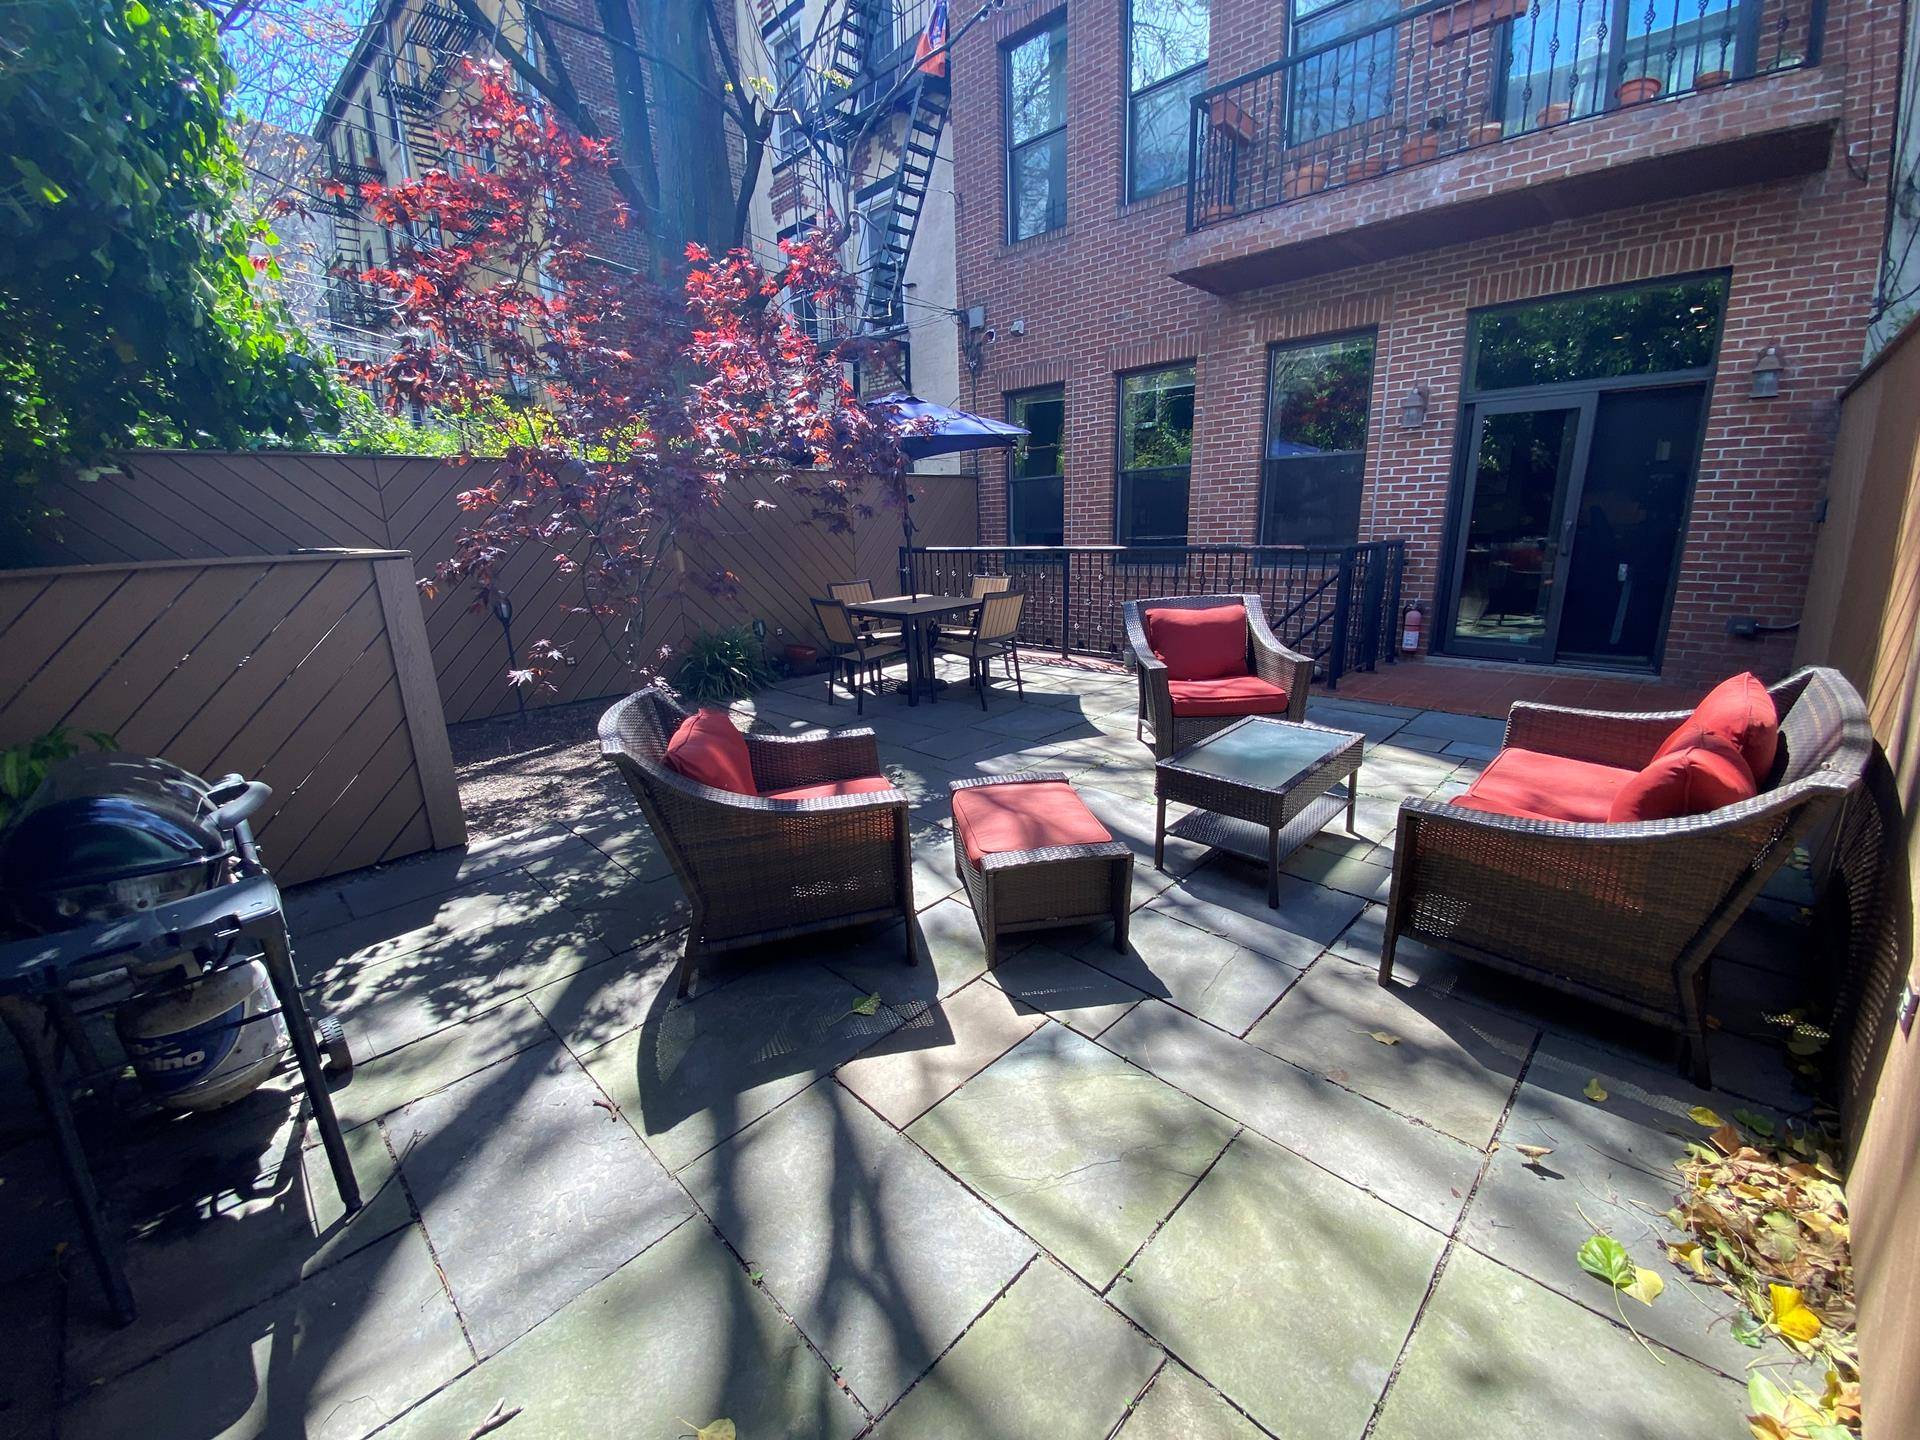 If outdoor space is what you crave, then this Cobble Hill duplex with its own private Back Yard will scratch that itch.